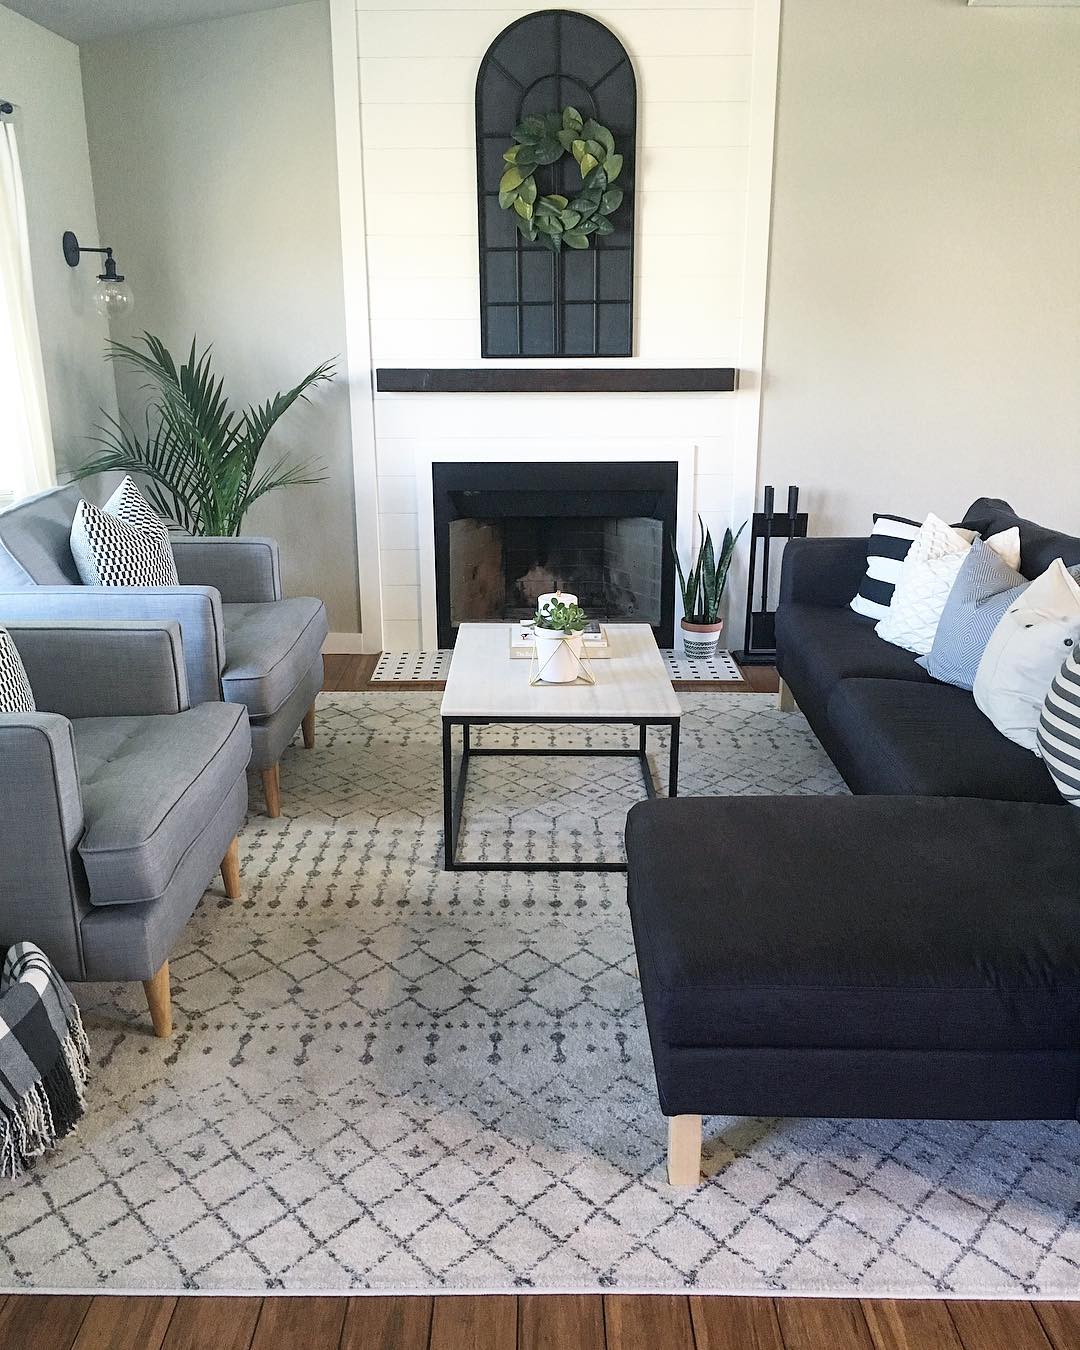 Clean Living Room Combining Both Modern and Minimalist Design Ideas. Photo by Instagram user @ourmodernhomestory